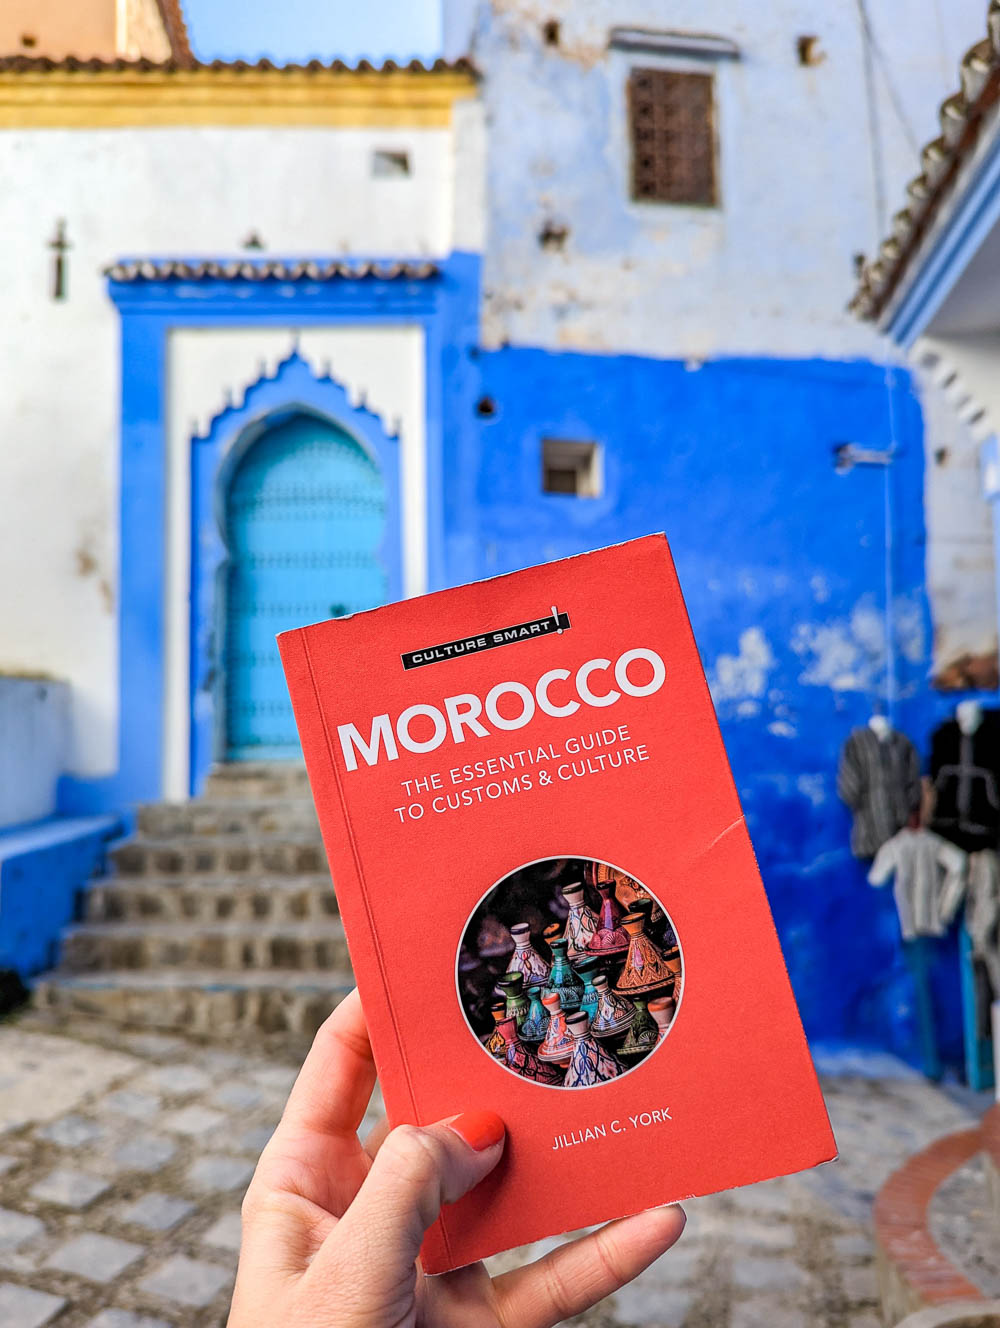 hand holding up a red morocco guide book in front of a blue door